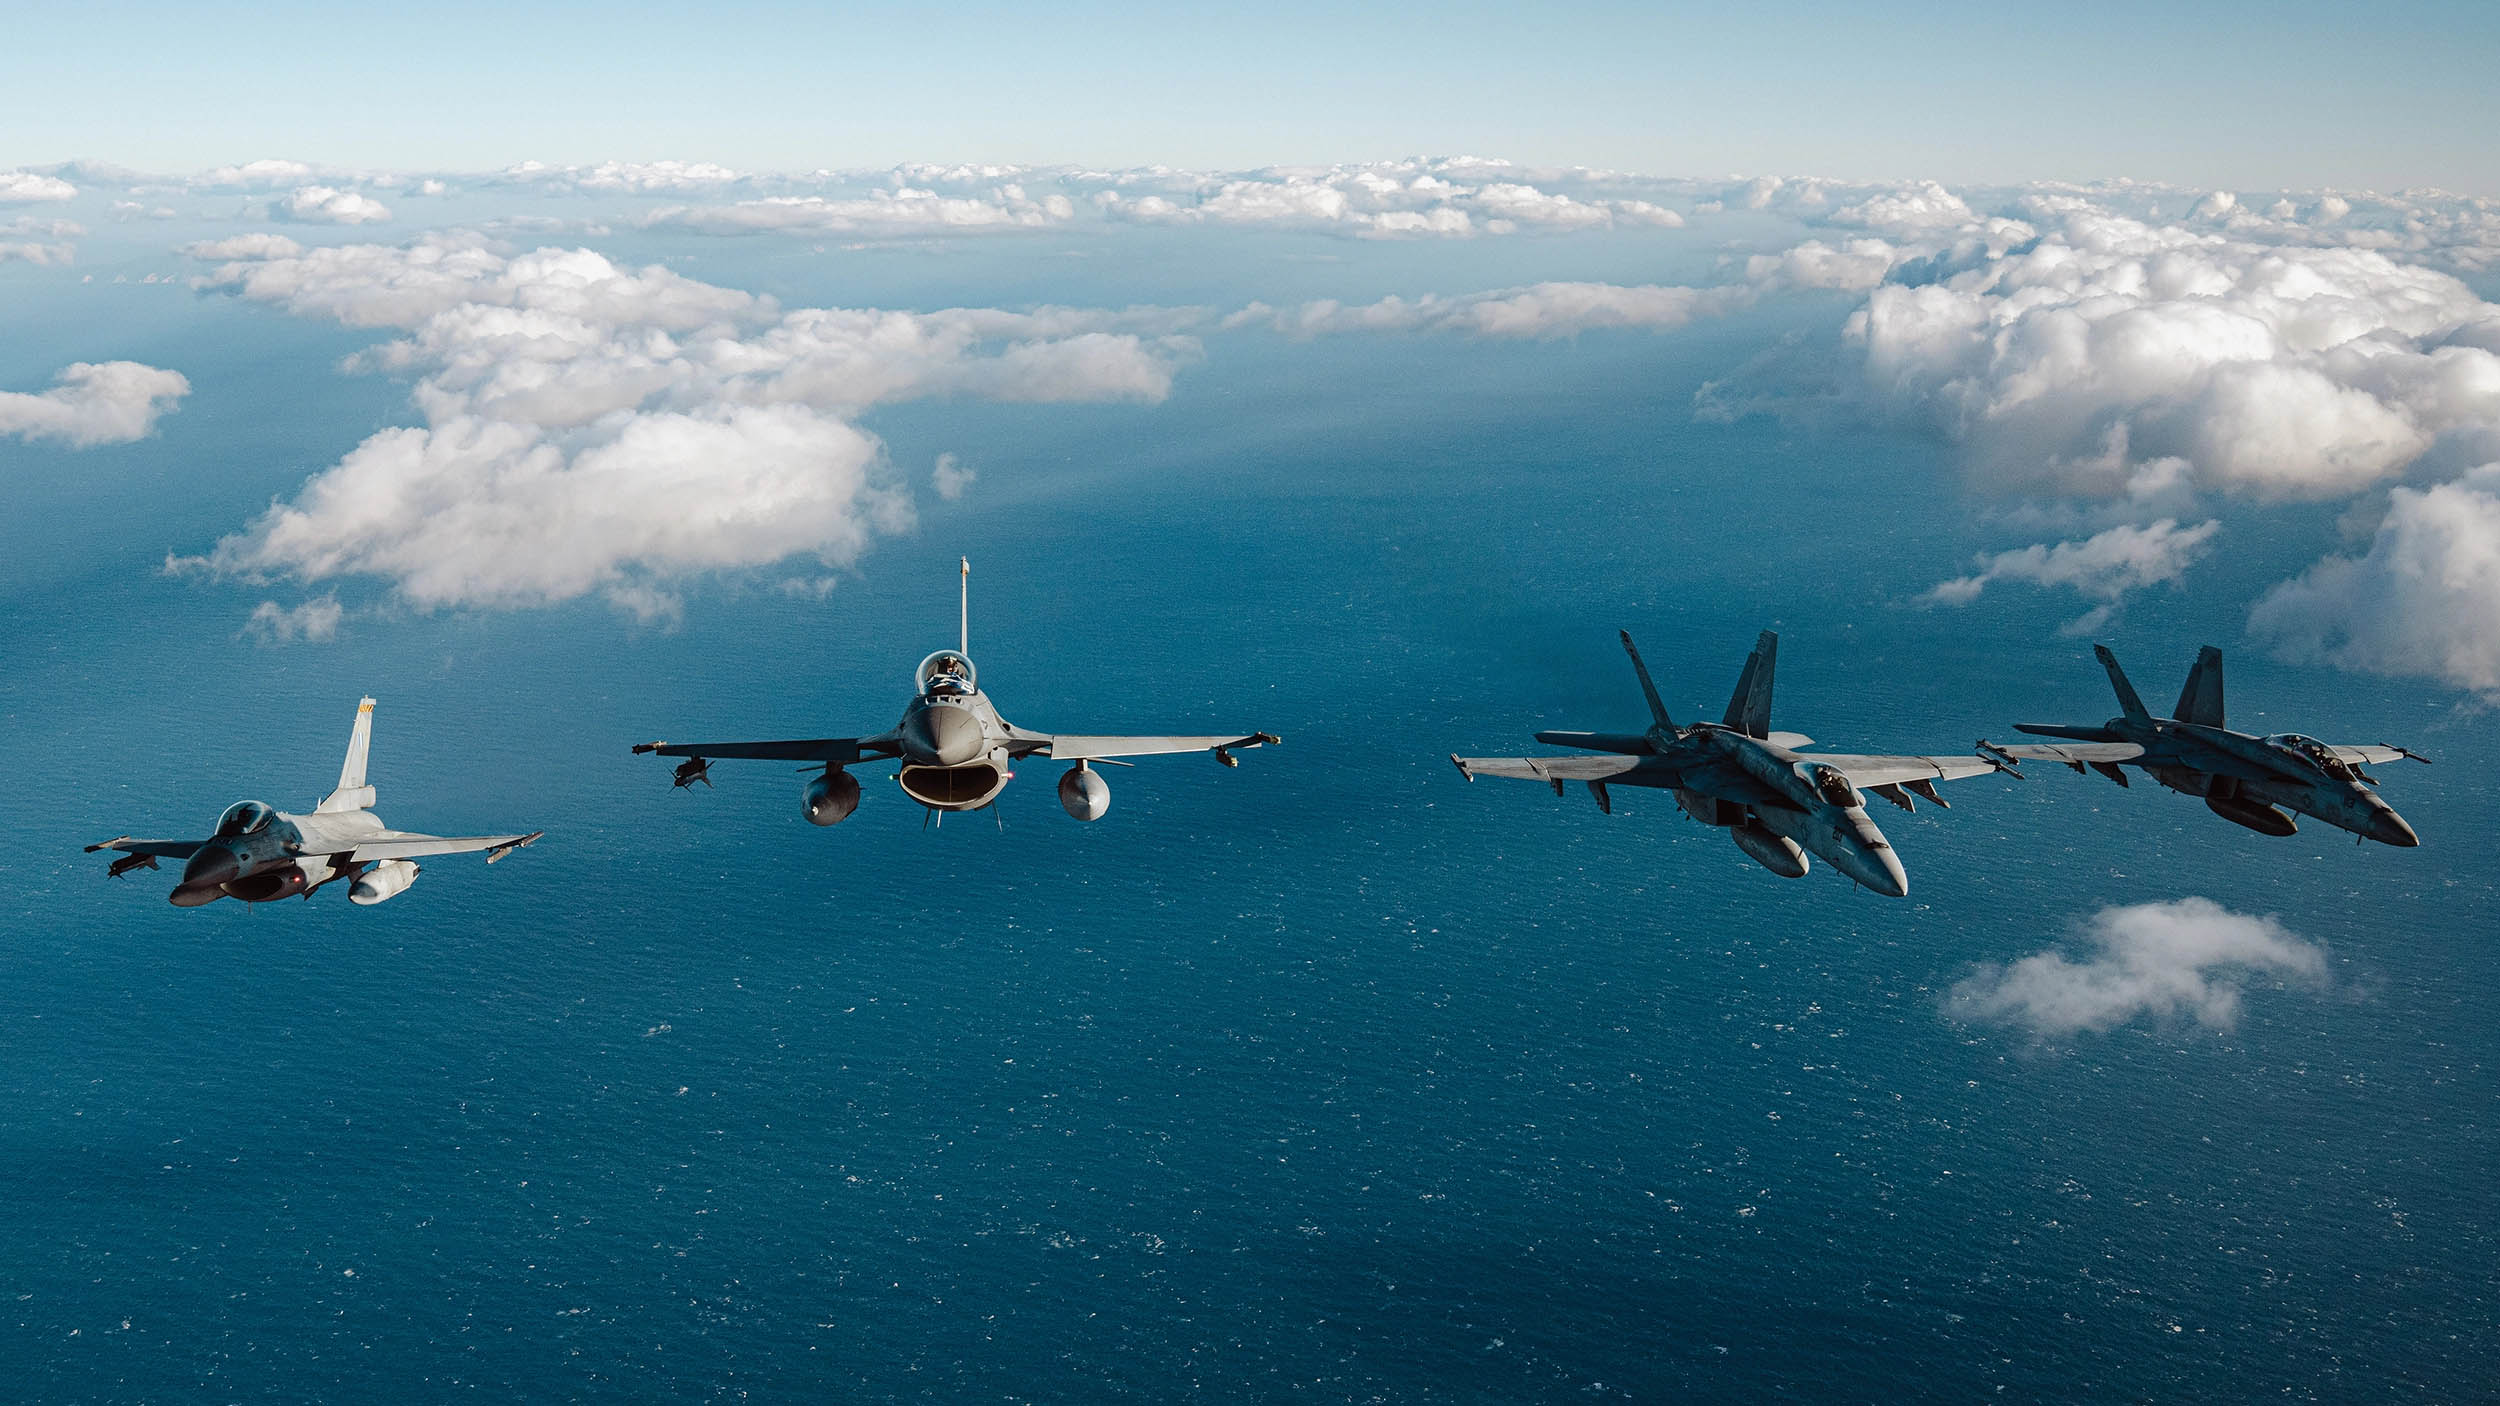 U.S. Navy F/A-18 Super Hornets and Greek F-16 Fighting Falcons conduct air-to-air training over Ionian Sea during Neptune Strike 2022, February 3, 2022 (U.S. Navy, courtesy French Armed Forces/Malaury Buis)